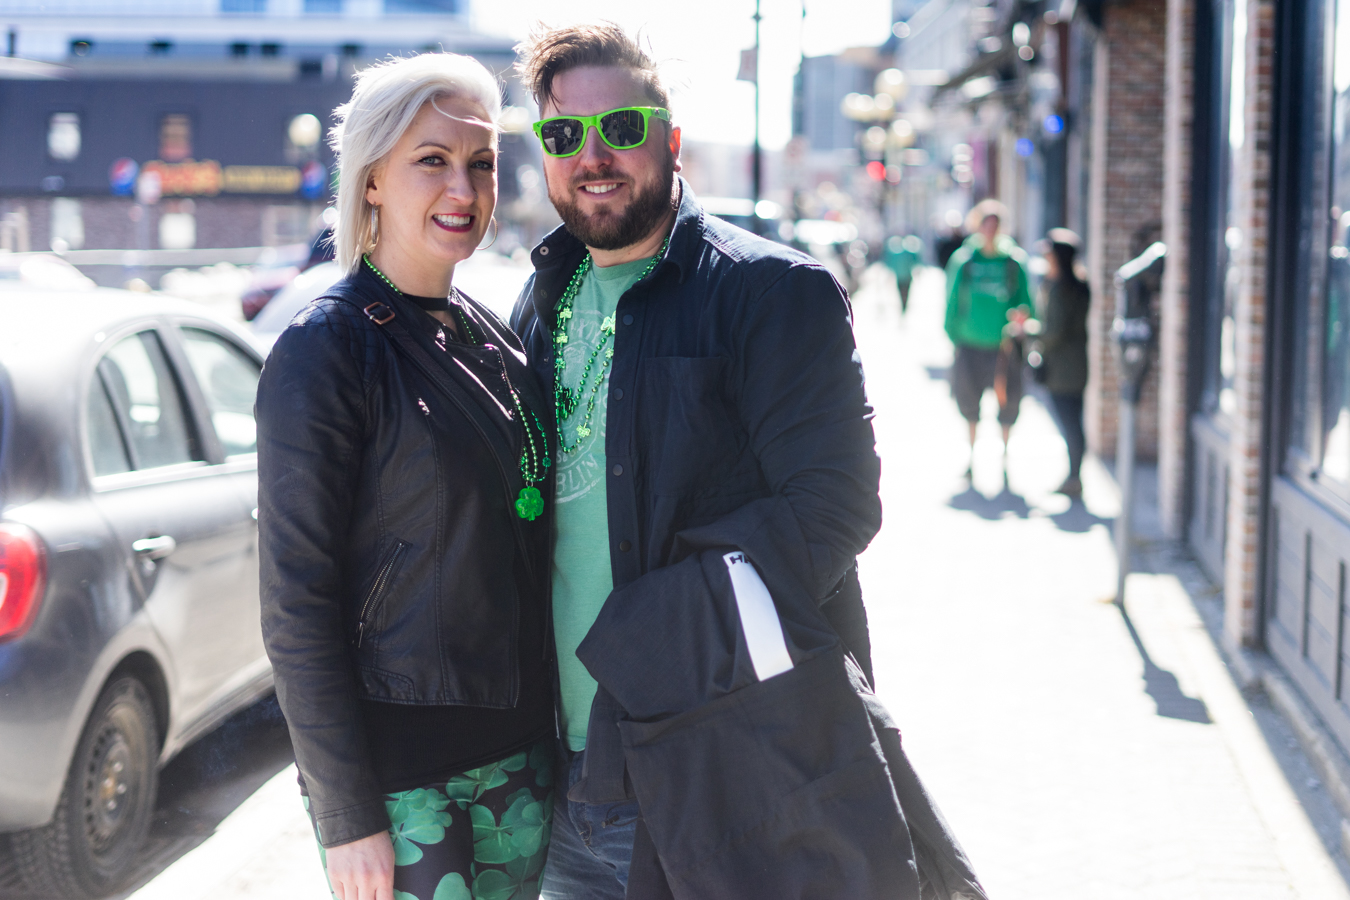 Kelly and albert on their way to KELLYS pub - St. Patricks Day 2019 - Water street